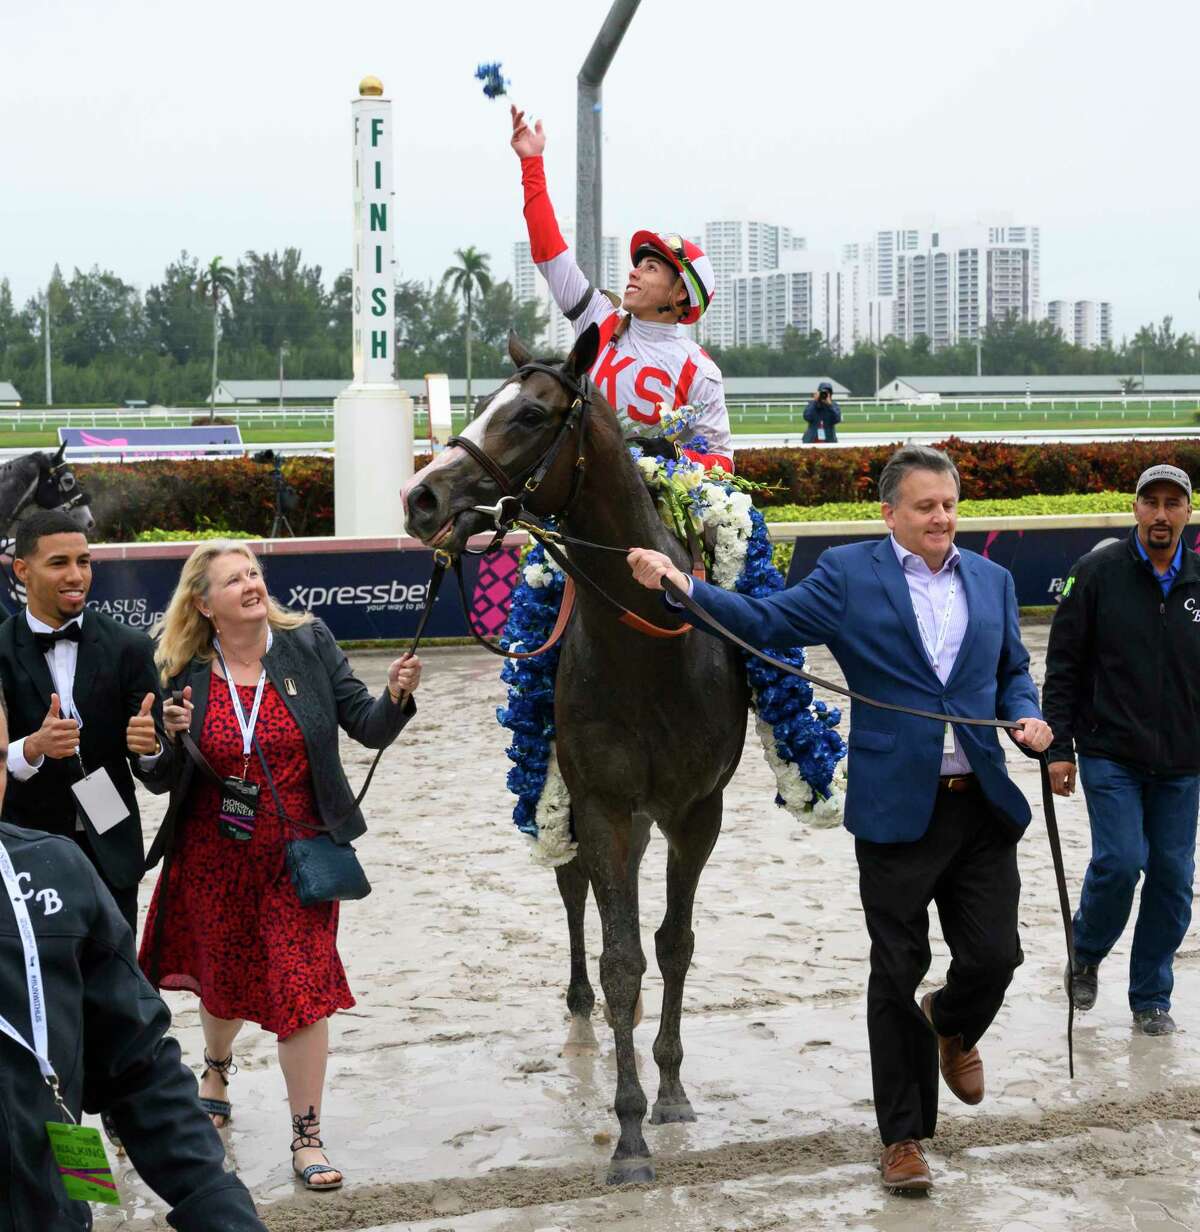 Bricks and Mortar ridden by Irad Ortiz Jr. is led to the winner's circle by co-owner Bill Lawrence, right, after winning the 1st. running of The Pegasus World Cup Turf International at Gulfstream Park Jan. 26, 2019 in Hallandale Beach, Florida. Photo Special to the Times Union by Skip Dickstein